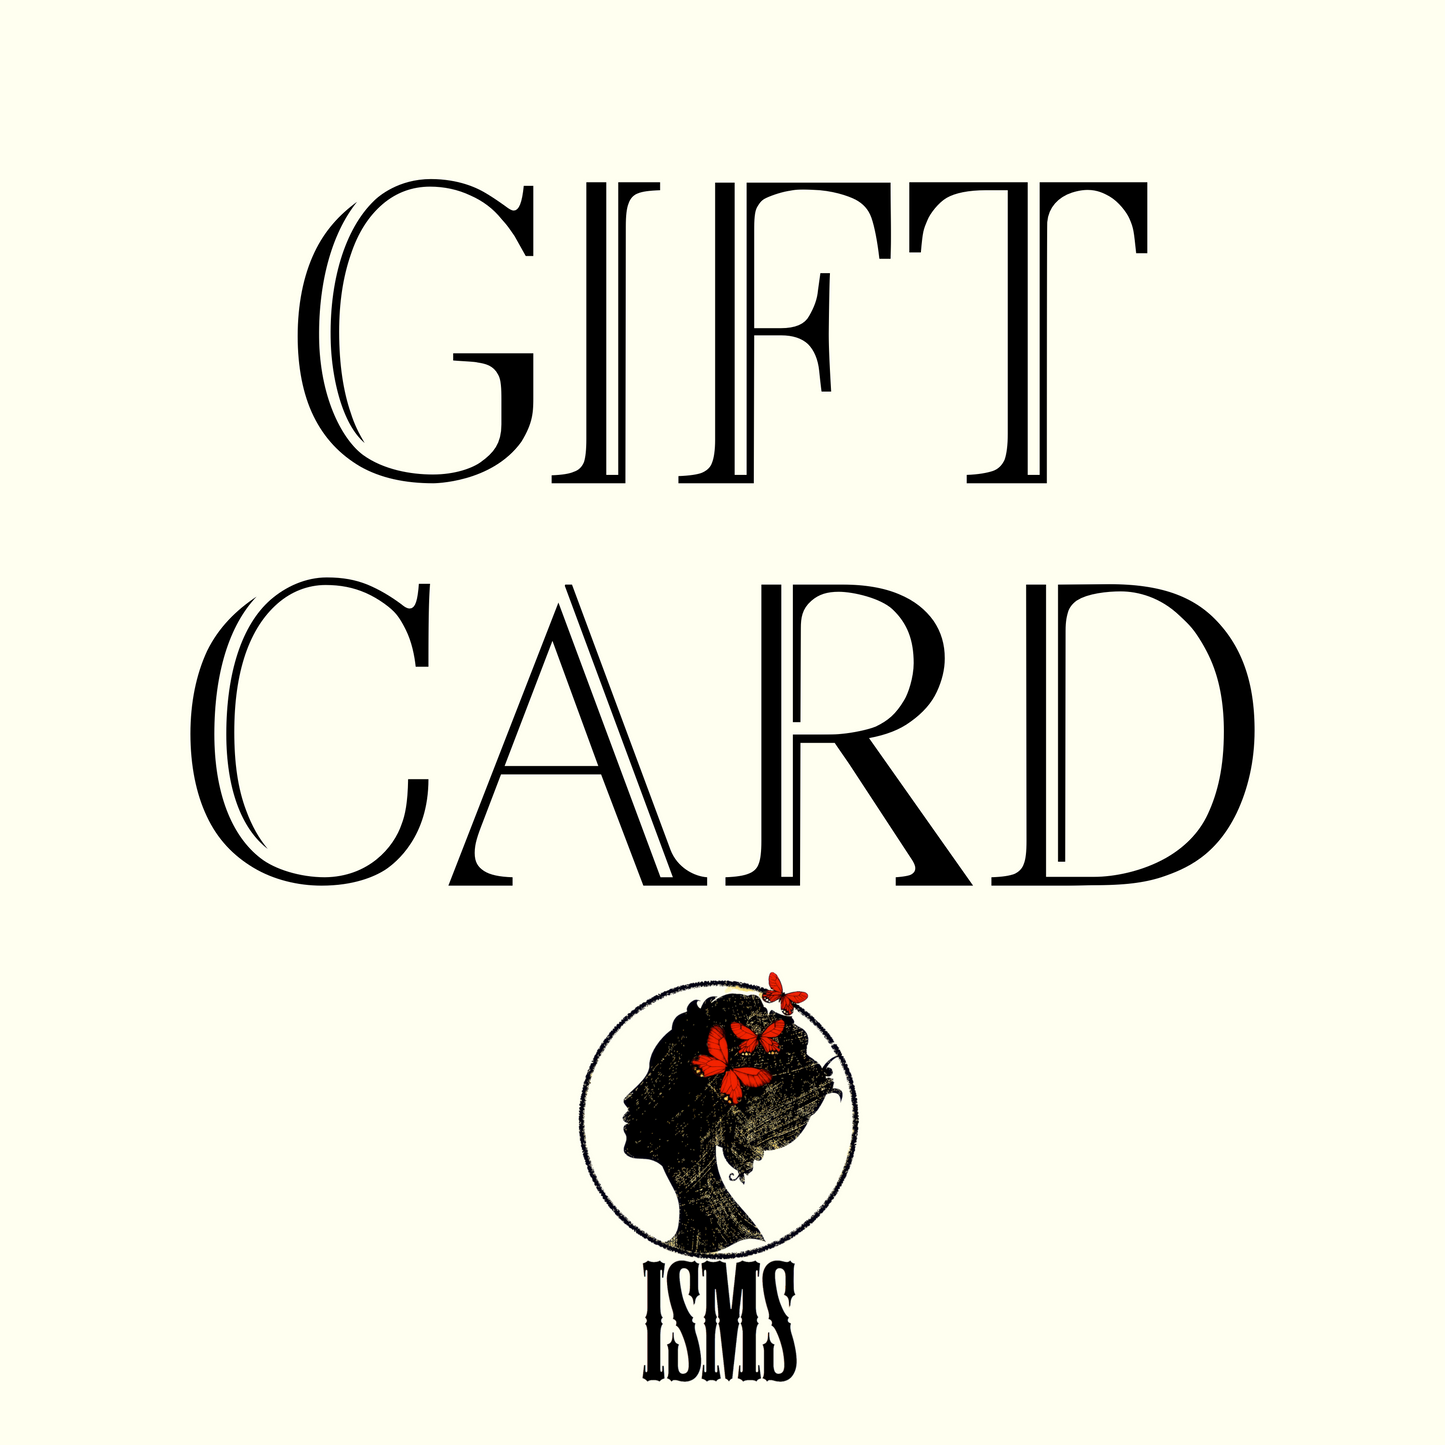 Isms Gift Certificate for Real Butterfly Conservation Art